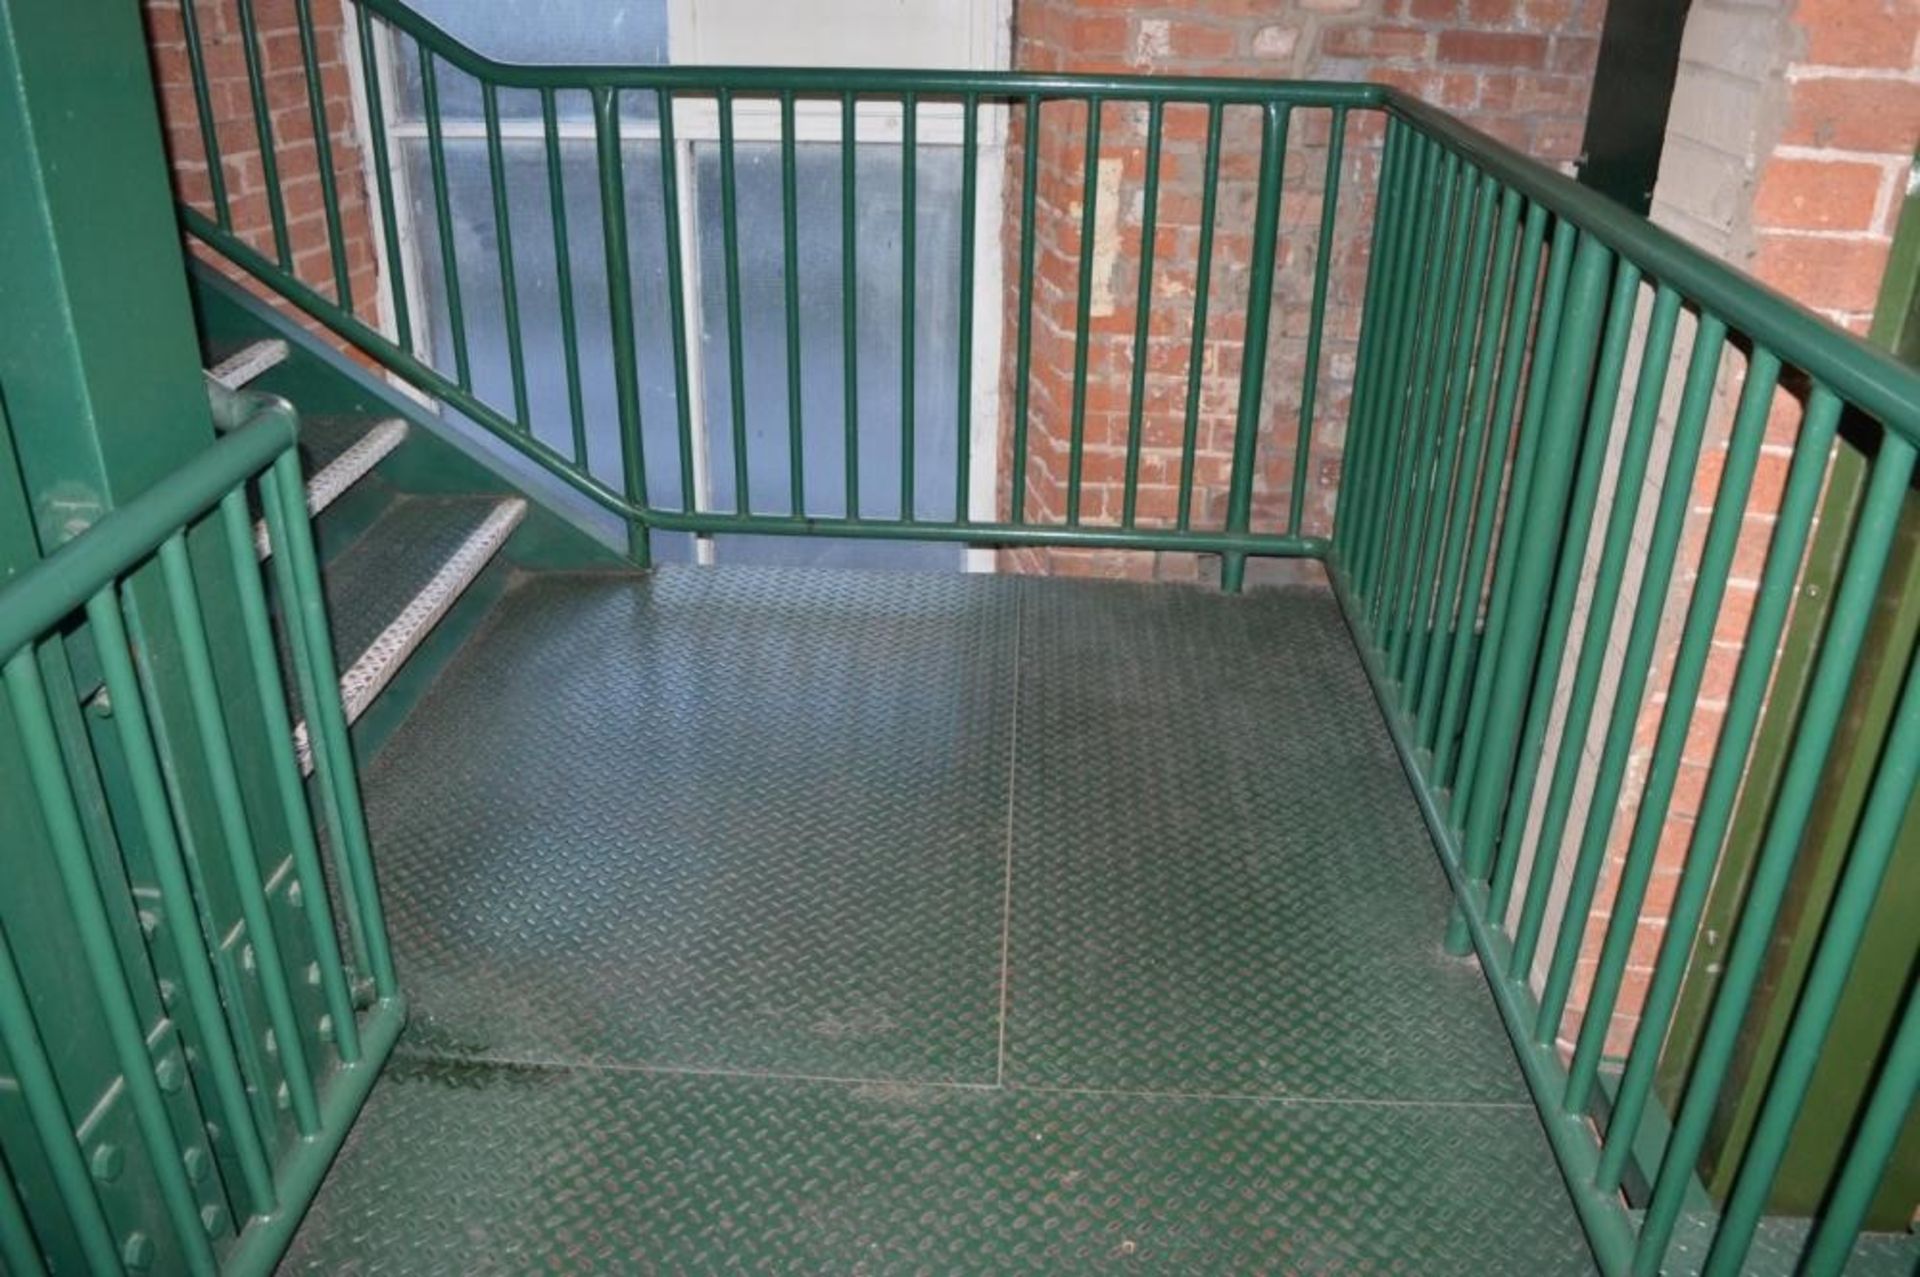 Botany Bay Heavy Duty Steel Customer Stairway - Covers Five Floors with an Overall Height of Approx - Image 20 of 30